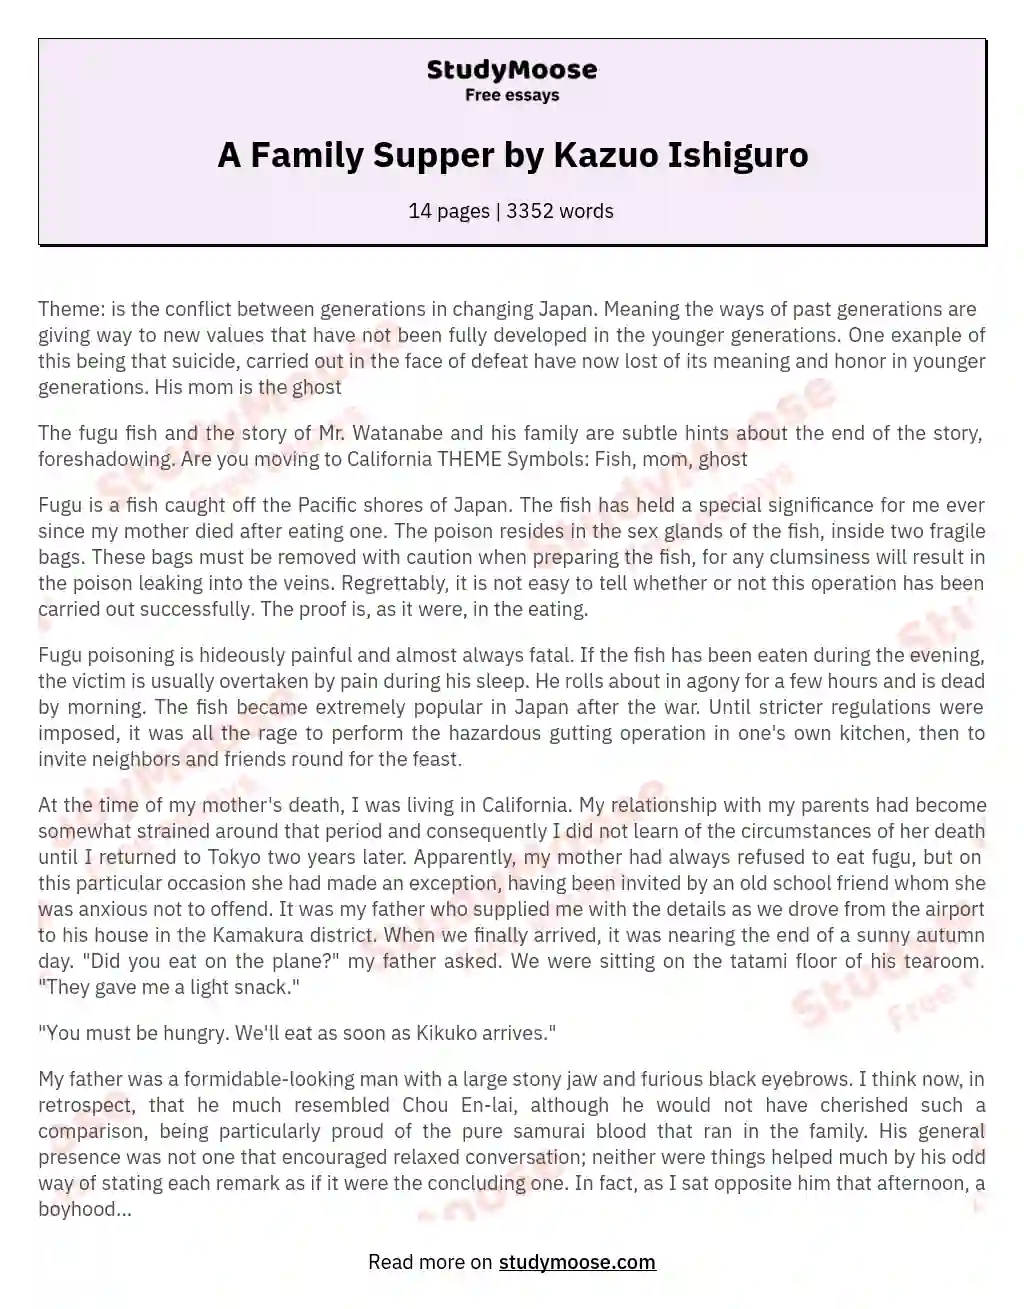 A Family Supper by Kazuo Ishiguro essay